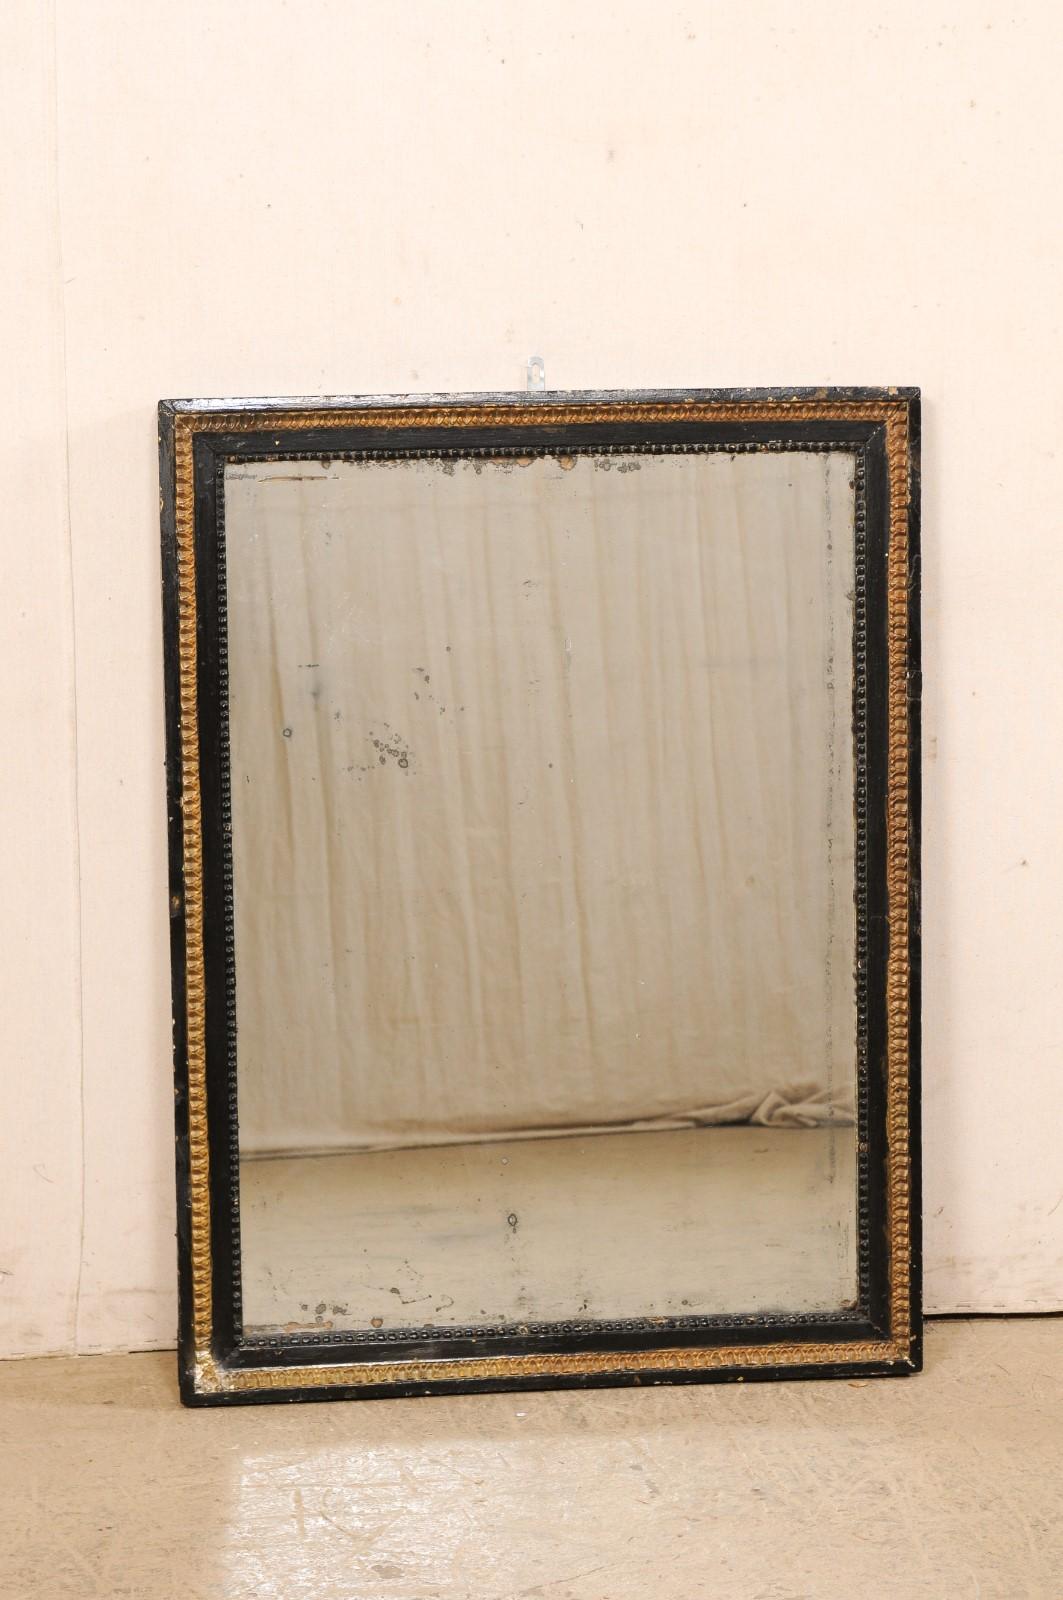 An Italian painted-wood wall mirror from the 19th century. This antique mirror from Italy is rectangular-shaped with a cleanly molded-wood outer surround, with petite bead trim lining the inner edge of mirror, and lamb's tongue trim just before the